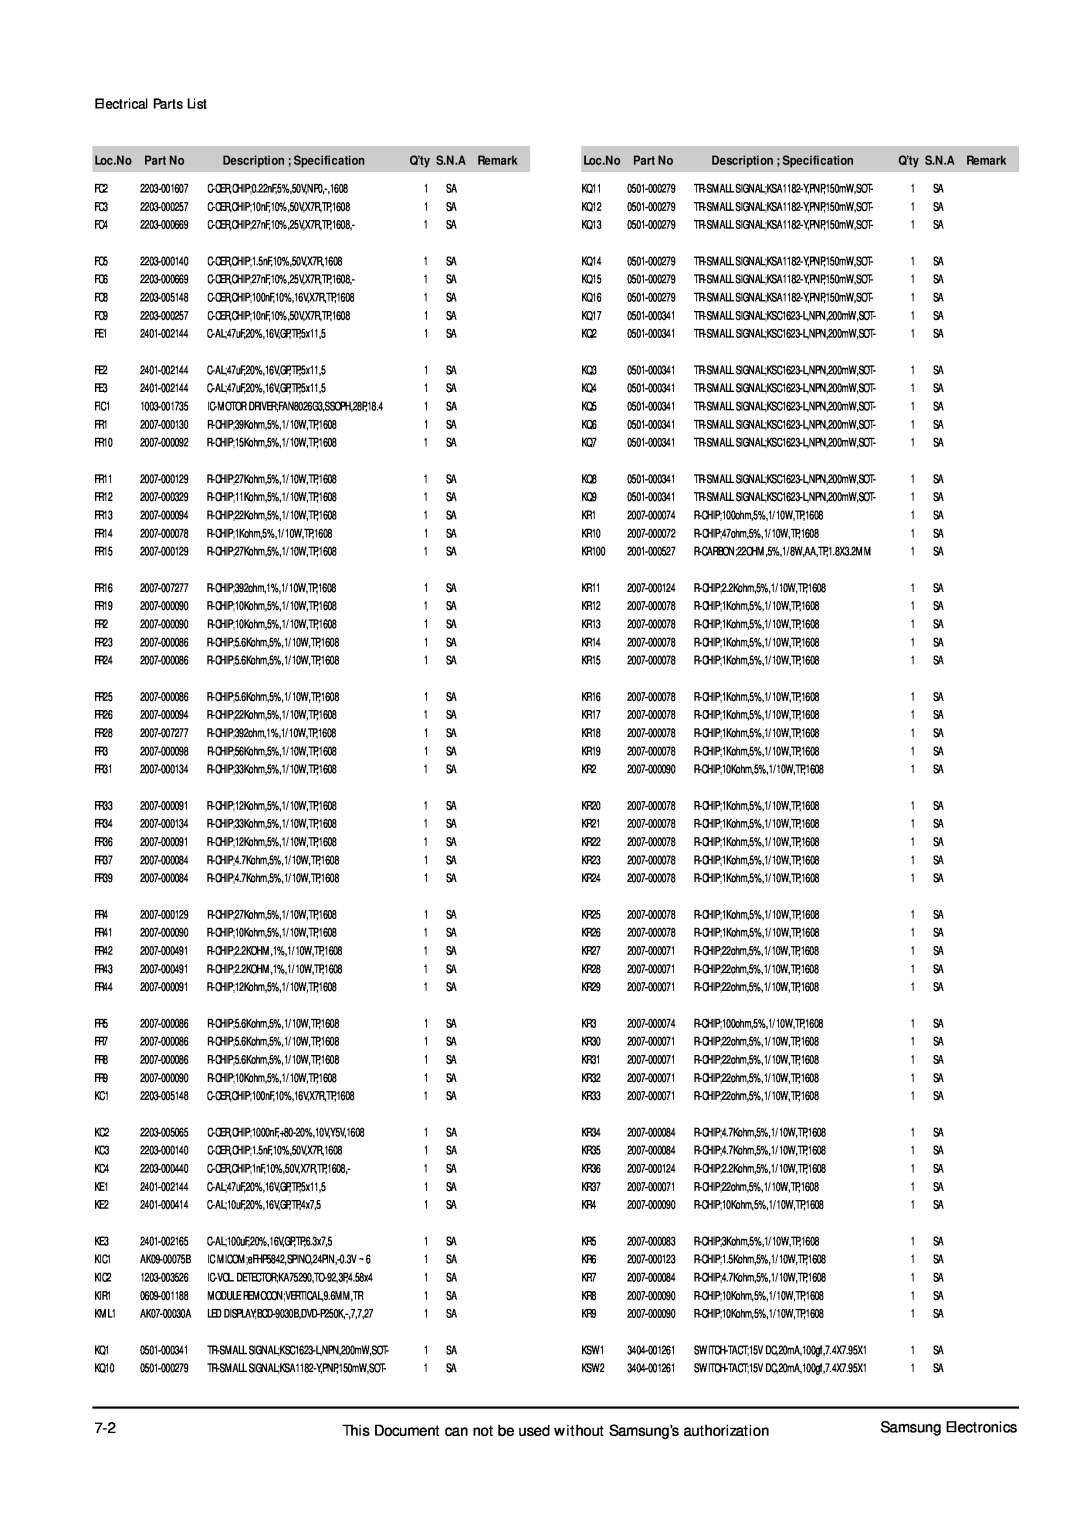 Samsung DVD-P355B/FOU, DVD-P355B/XEU This Document can not be used without Samsung’s authorization, Electrical Parts List 